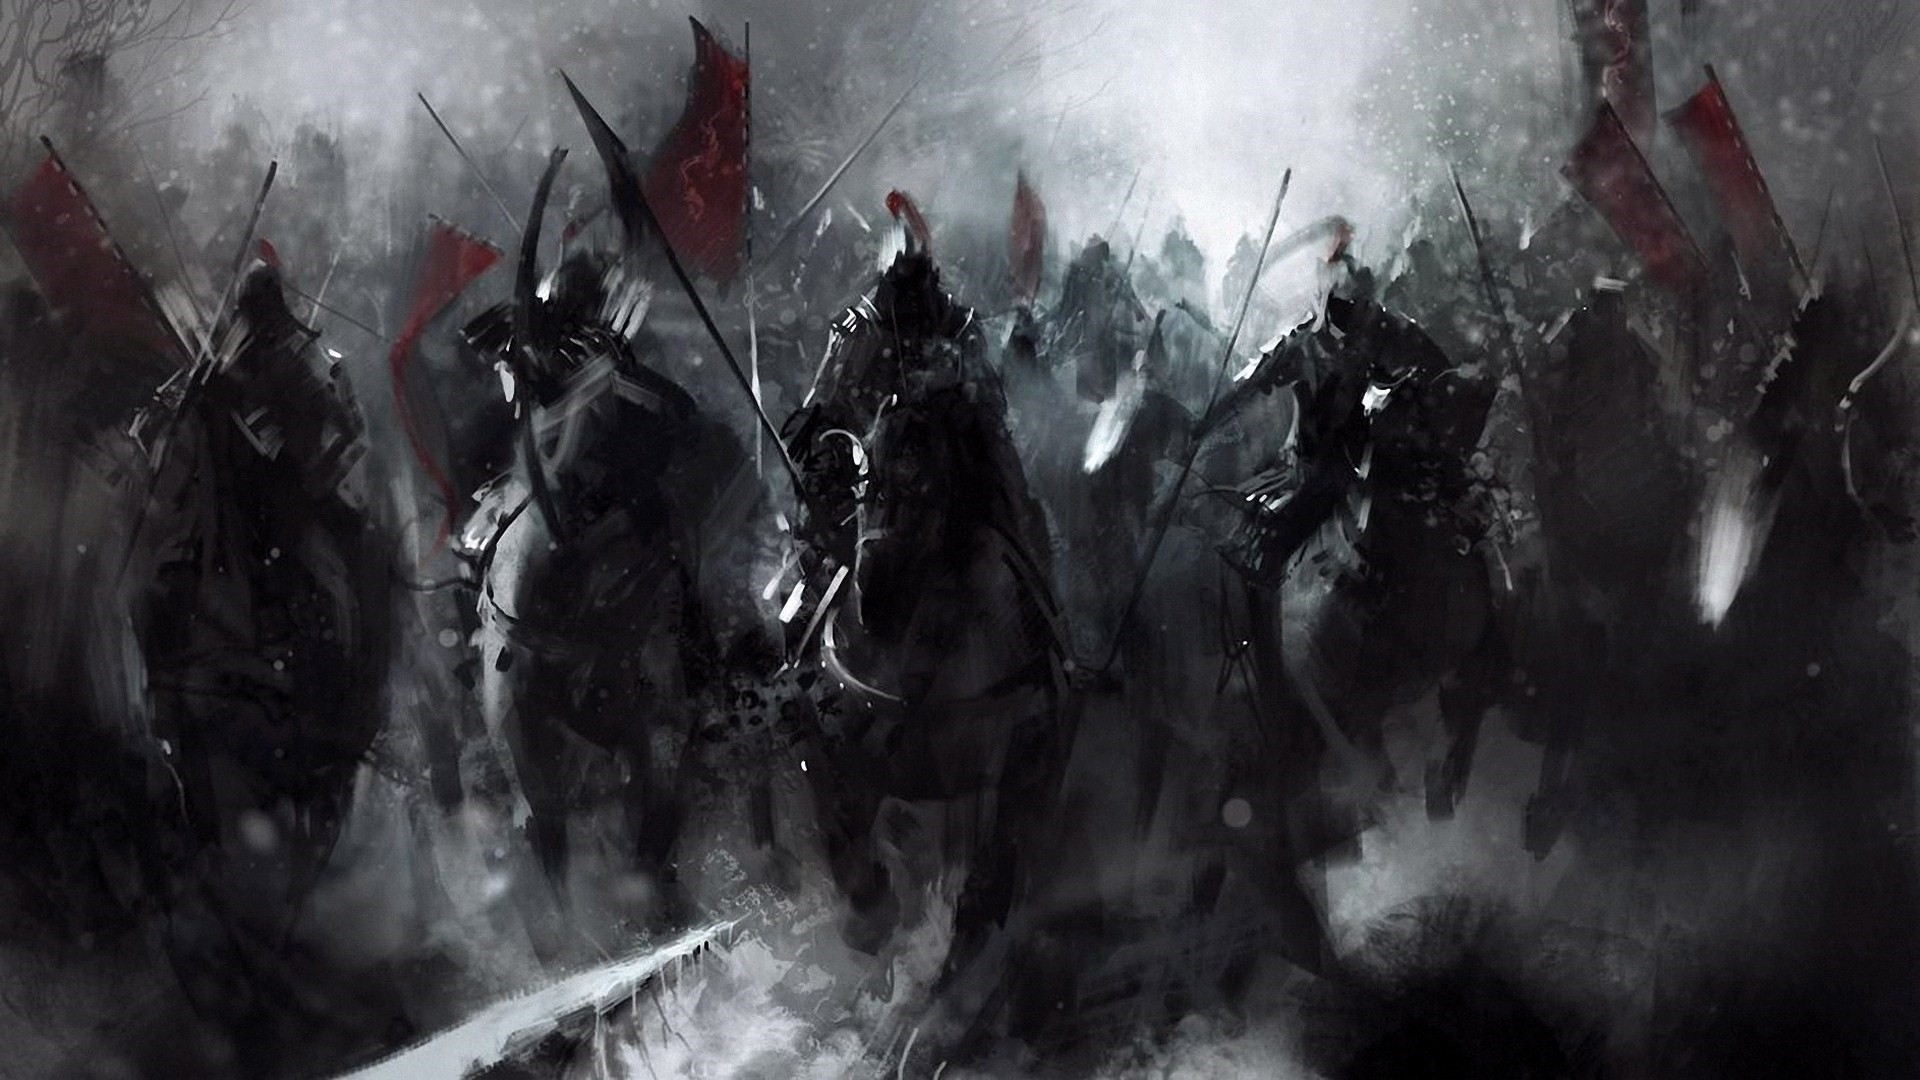 1920x1080 Medieval Battle Painting - wallpaper.